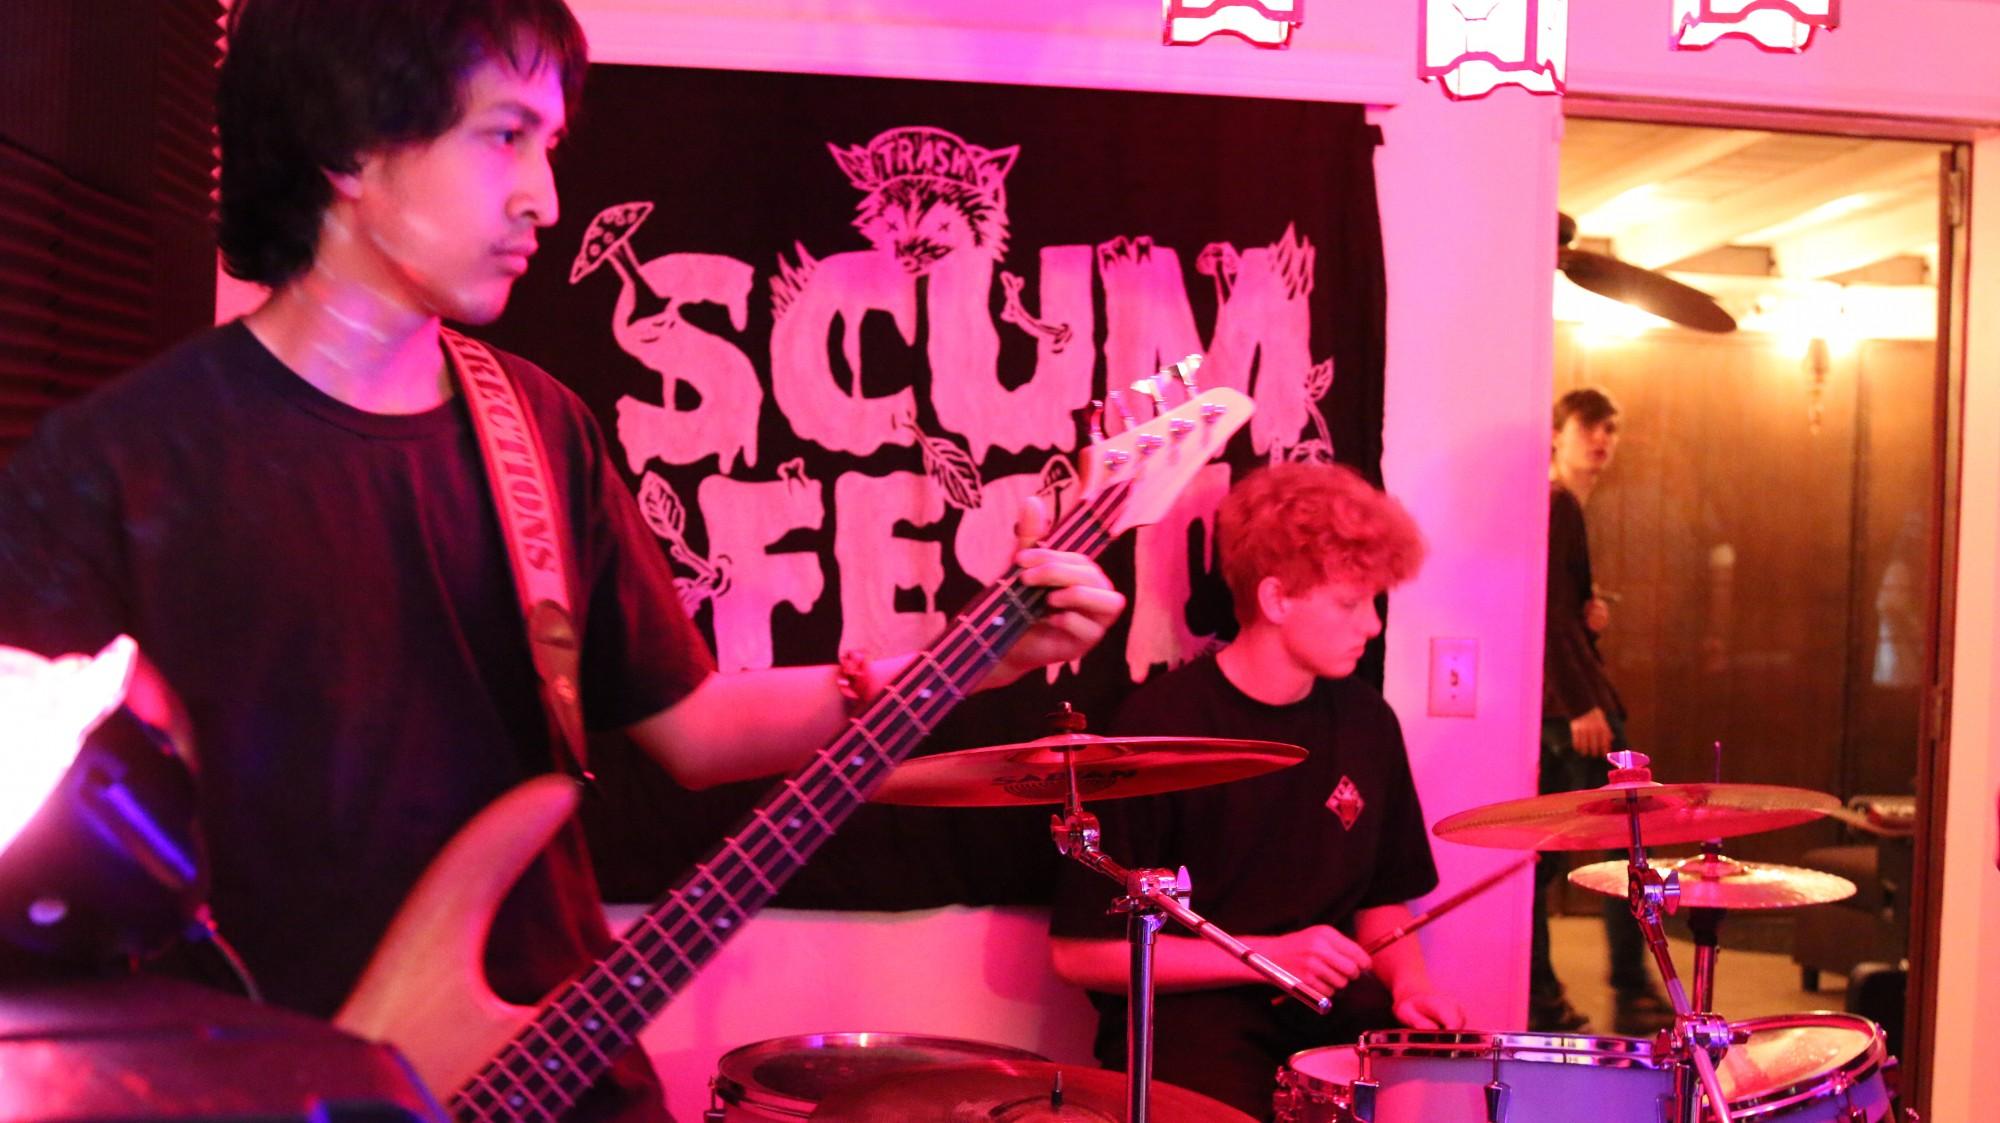 Reuben Matias, left, and Johnny King, right, play with their band Zenny Cake at Scum Fest. The event was held on Nov. 16 to raise money for a new music venue.